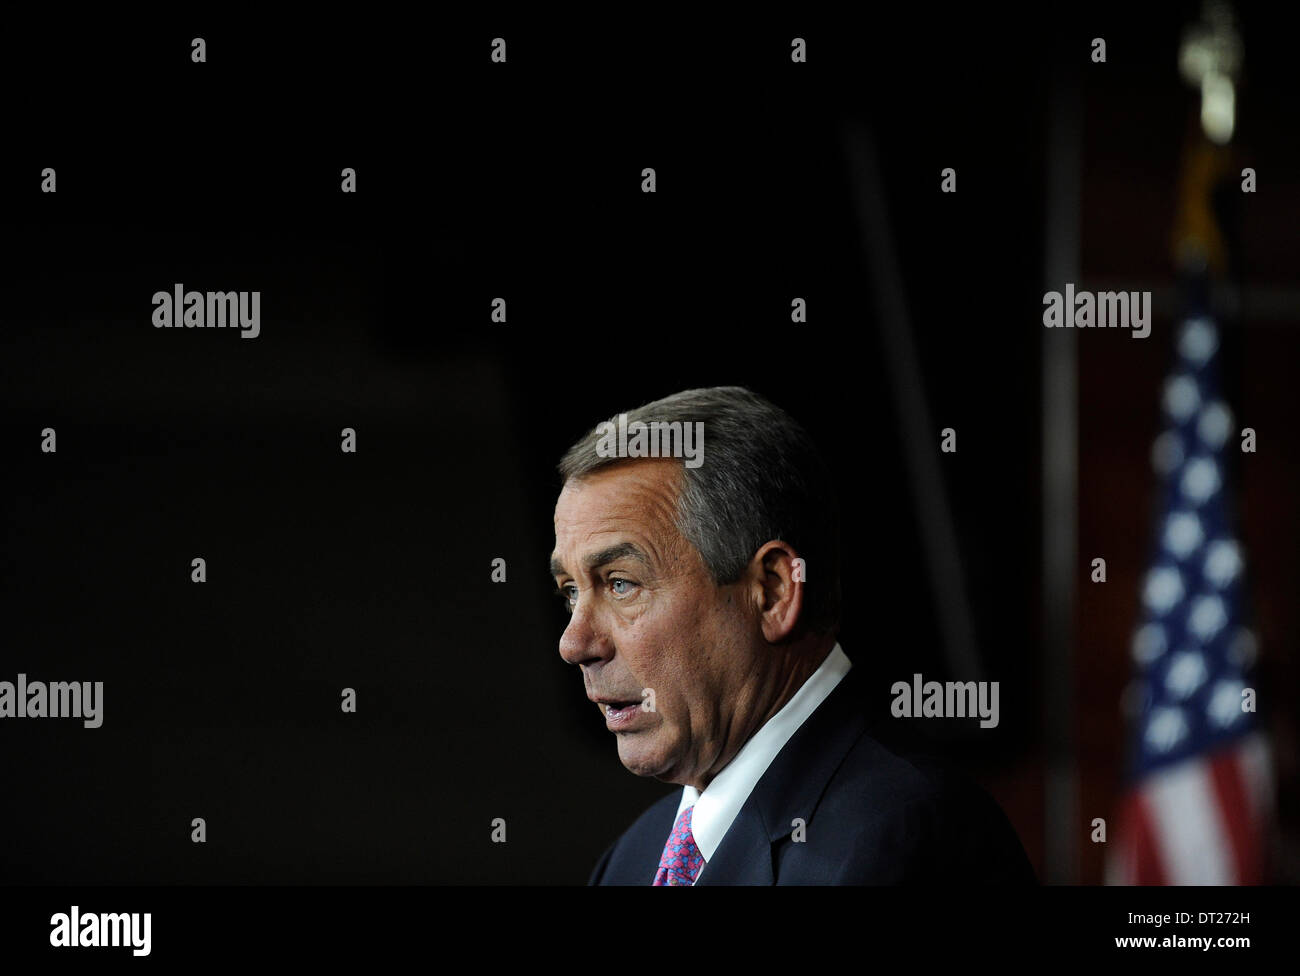 Washington DC, USA. 6th Feb, 2014. U.S. House Speaker John Boehner (R-Oh) speaks during a press conference on Capitol Hill in Washington DC, capital of the United States, Feb. 6, 2014. Boehner said on Thursday that it will be difficult to pass immigration legislation this year. Credit:  Zhang Jun/Xinhua/Alamy Live News Stock Photo